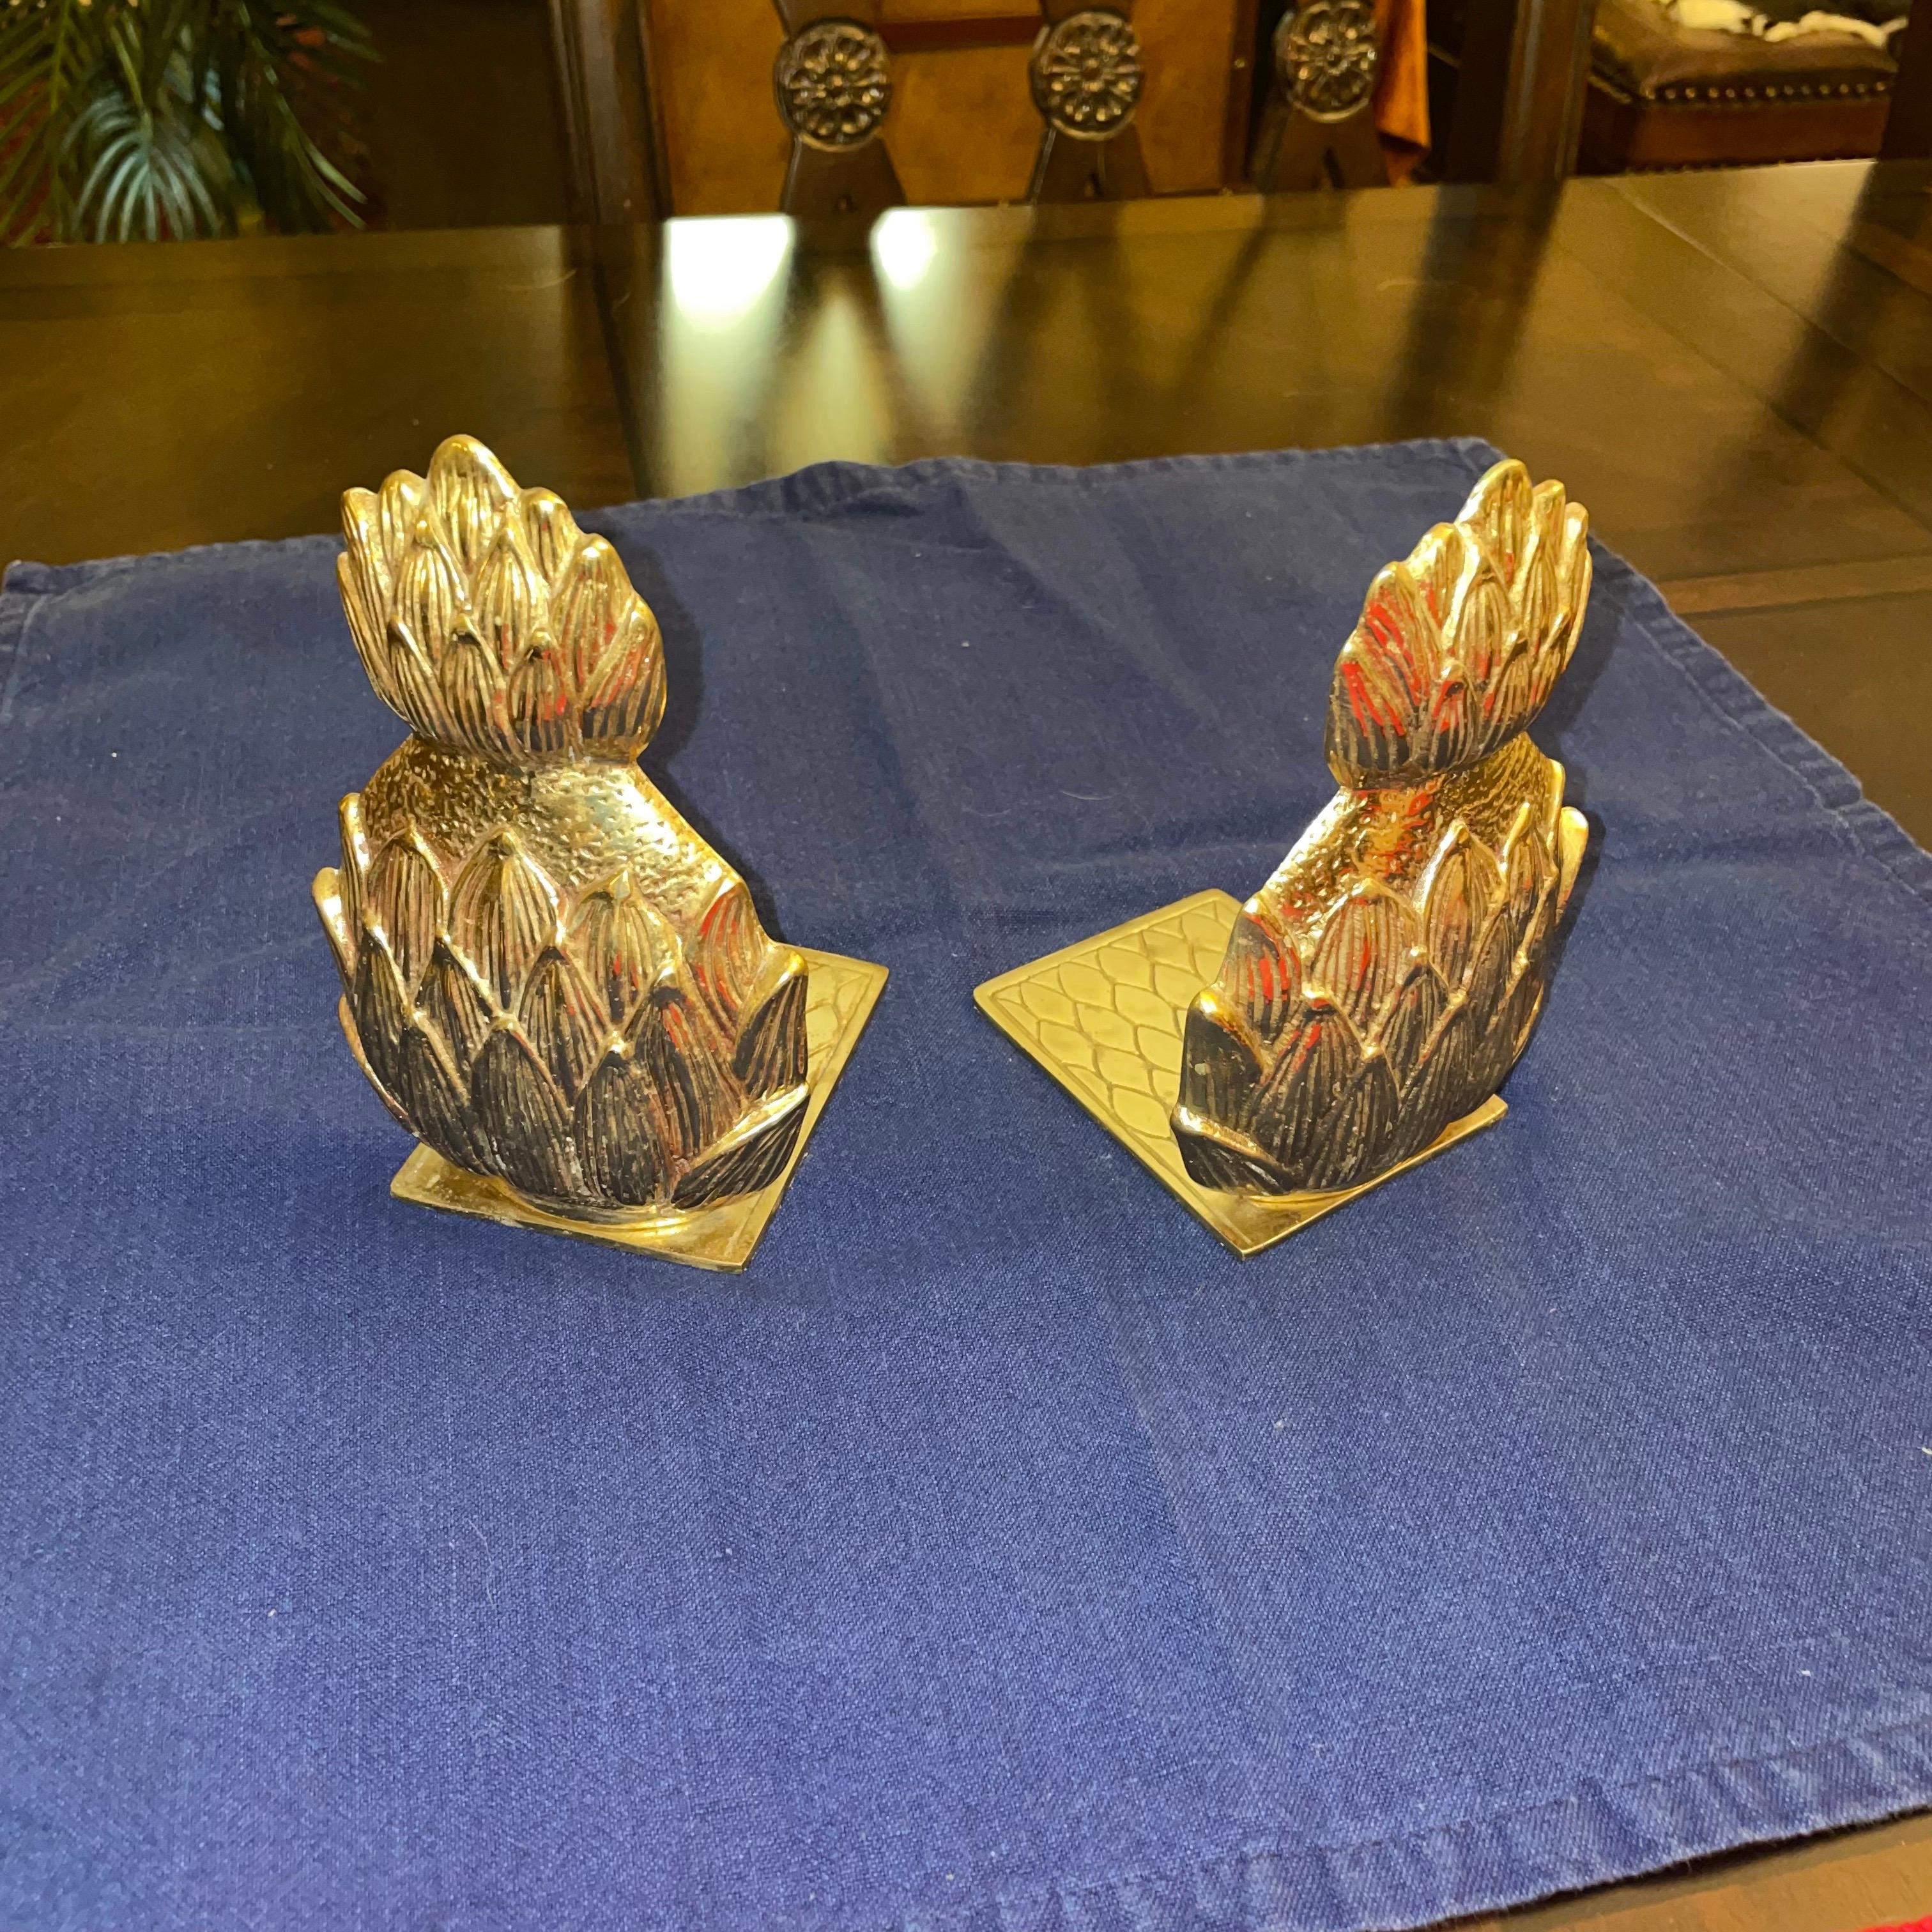 A pair of brass pineapple bookends in great condition. They both have felt bottoms so as to not scratch the surface they are on. Recently polished.